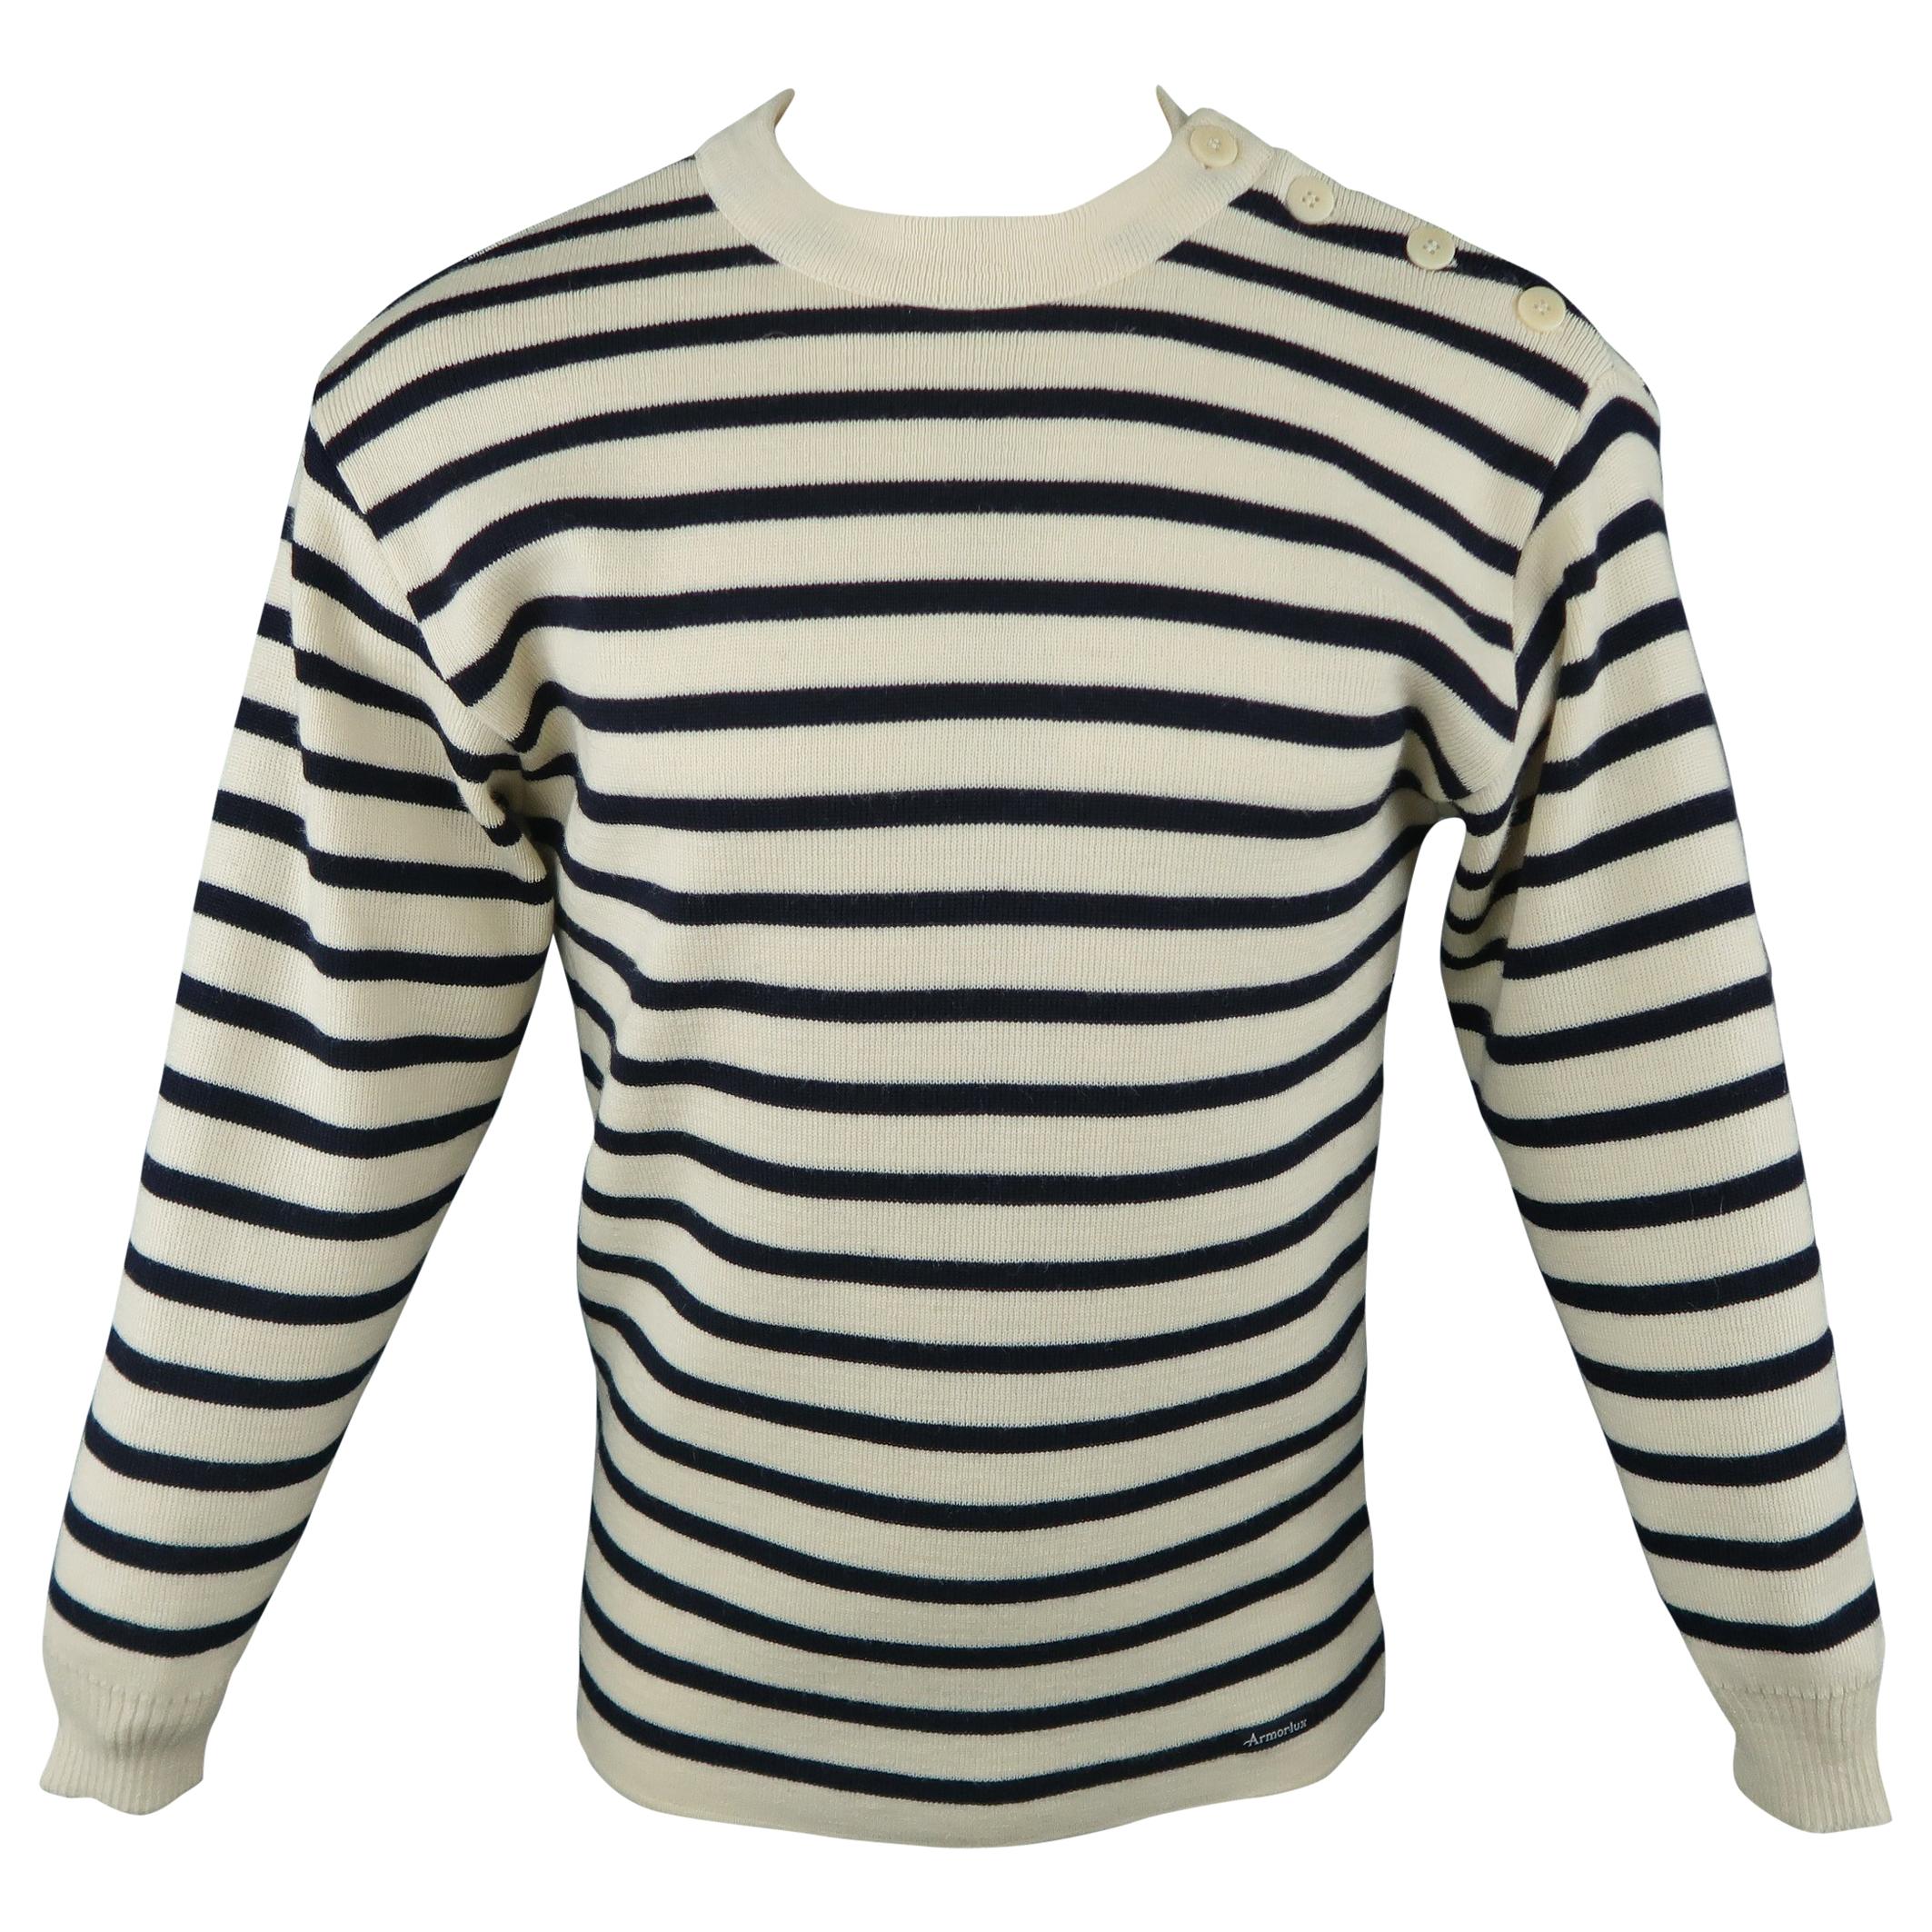 ARMOR-LUX Size M Cream & Navy Stripe Wool French Sailor Pullover Sweater